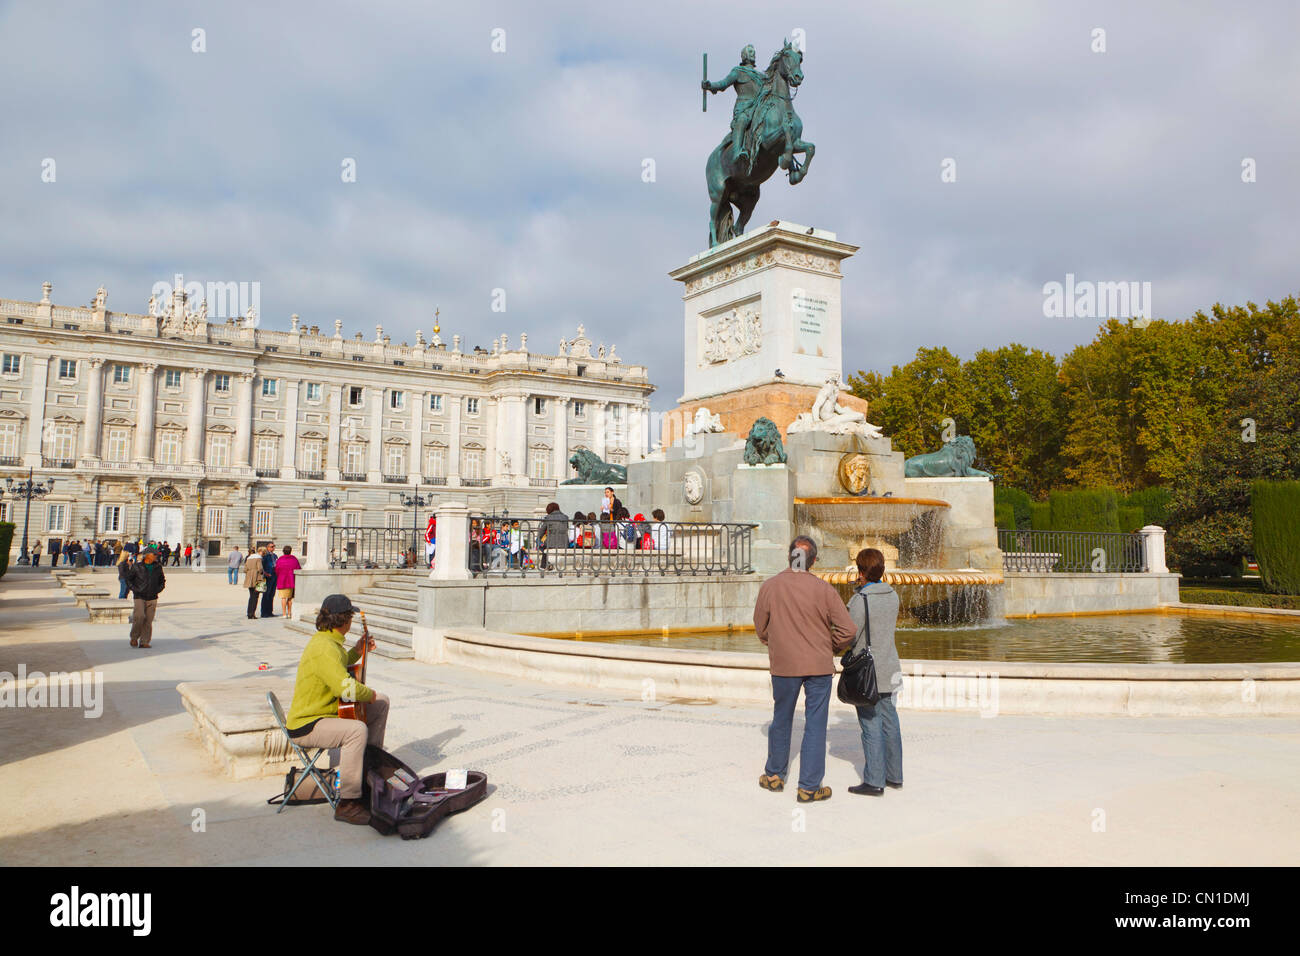 Madrid, Spain. Plaza de Oriente with Palacio Real, or Royal Palace background. Equestrian statue of Philip IV by Pietro Tacca. Stock Photo